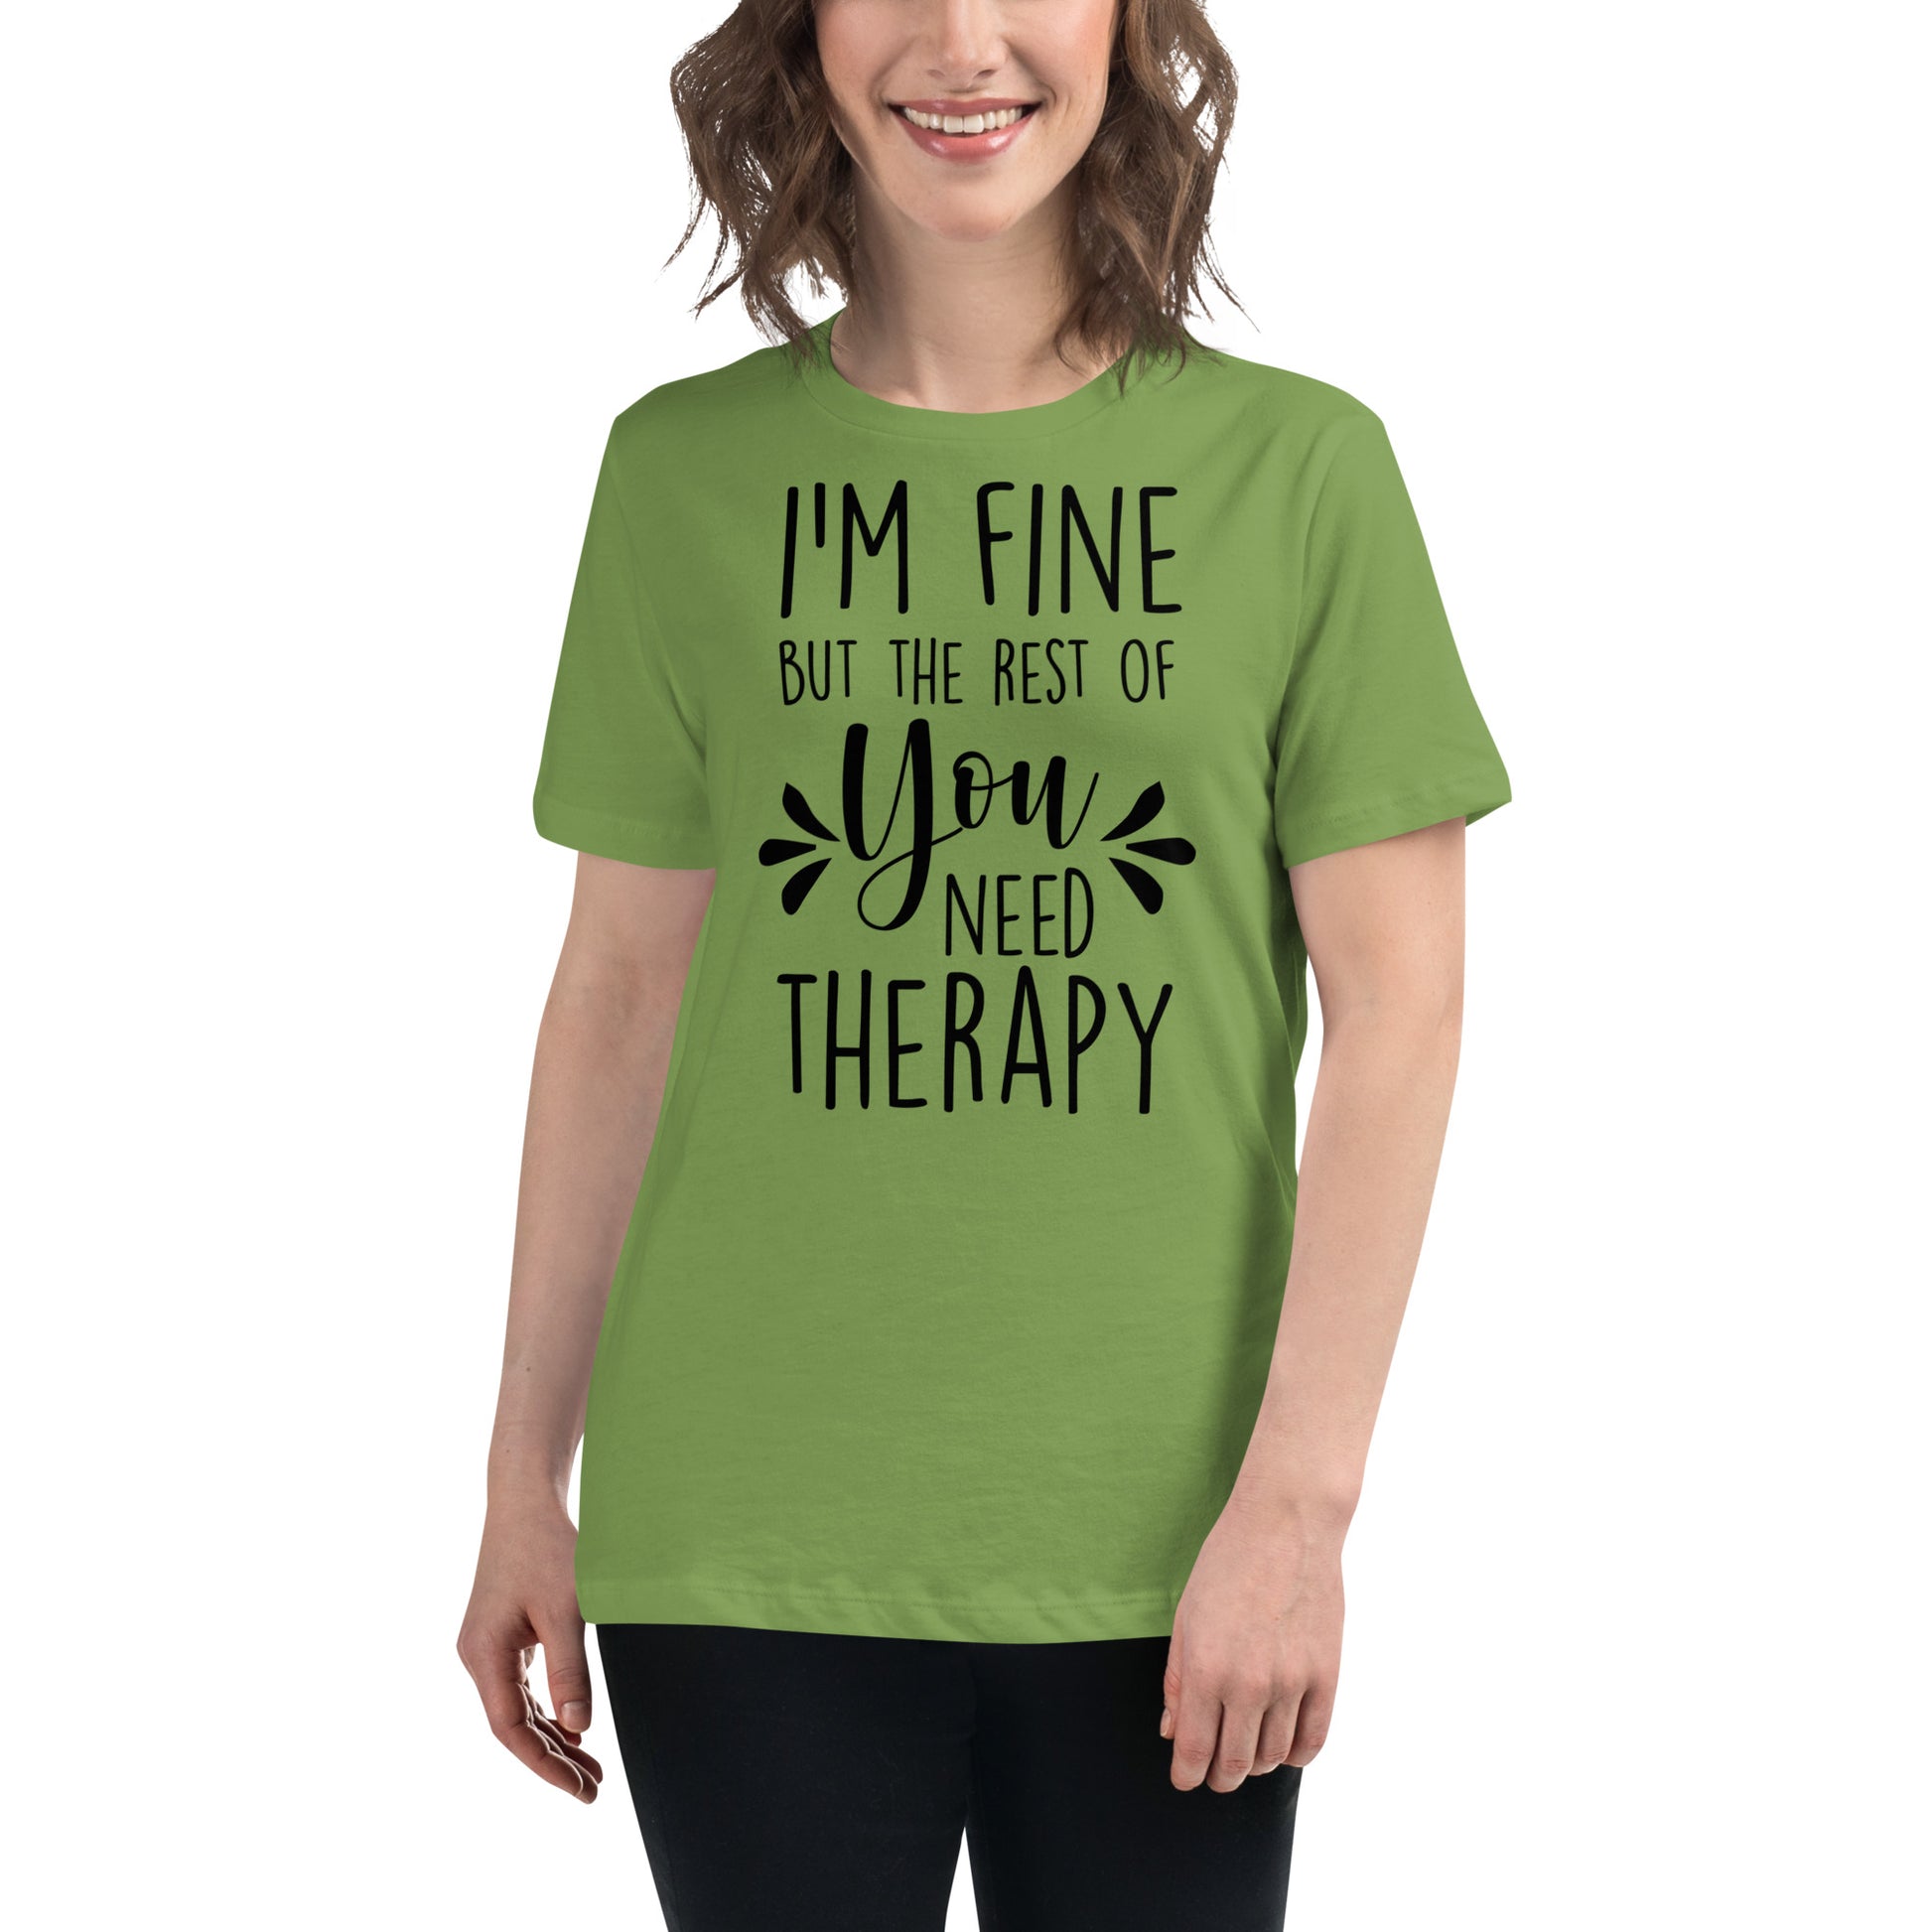 I'm Fine But the Rest of You Need Therapy Women's Relaxed T-Shirt